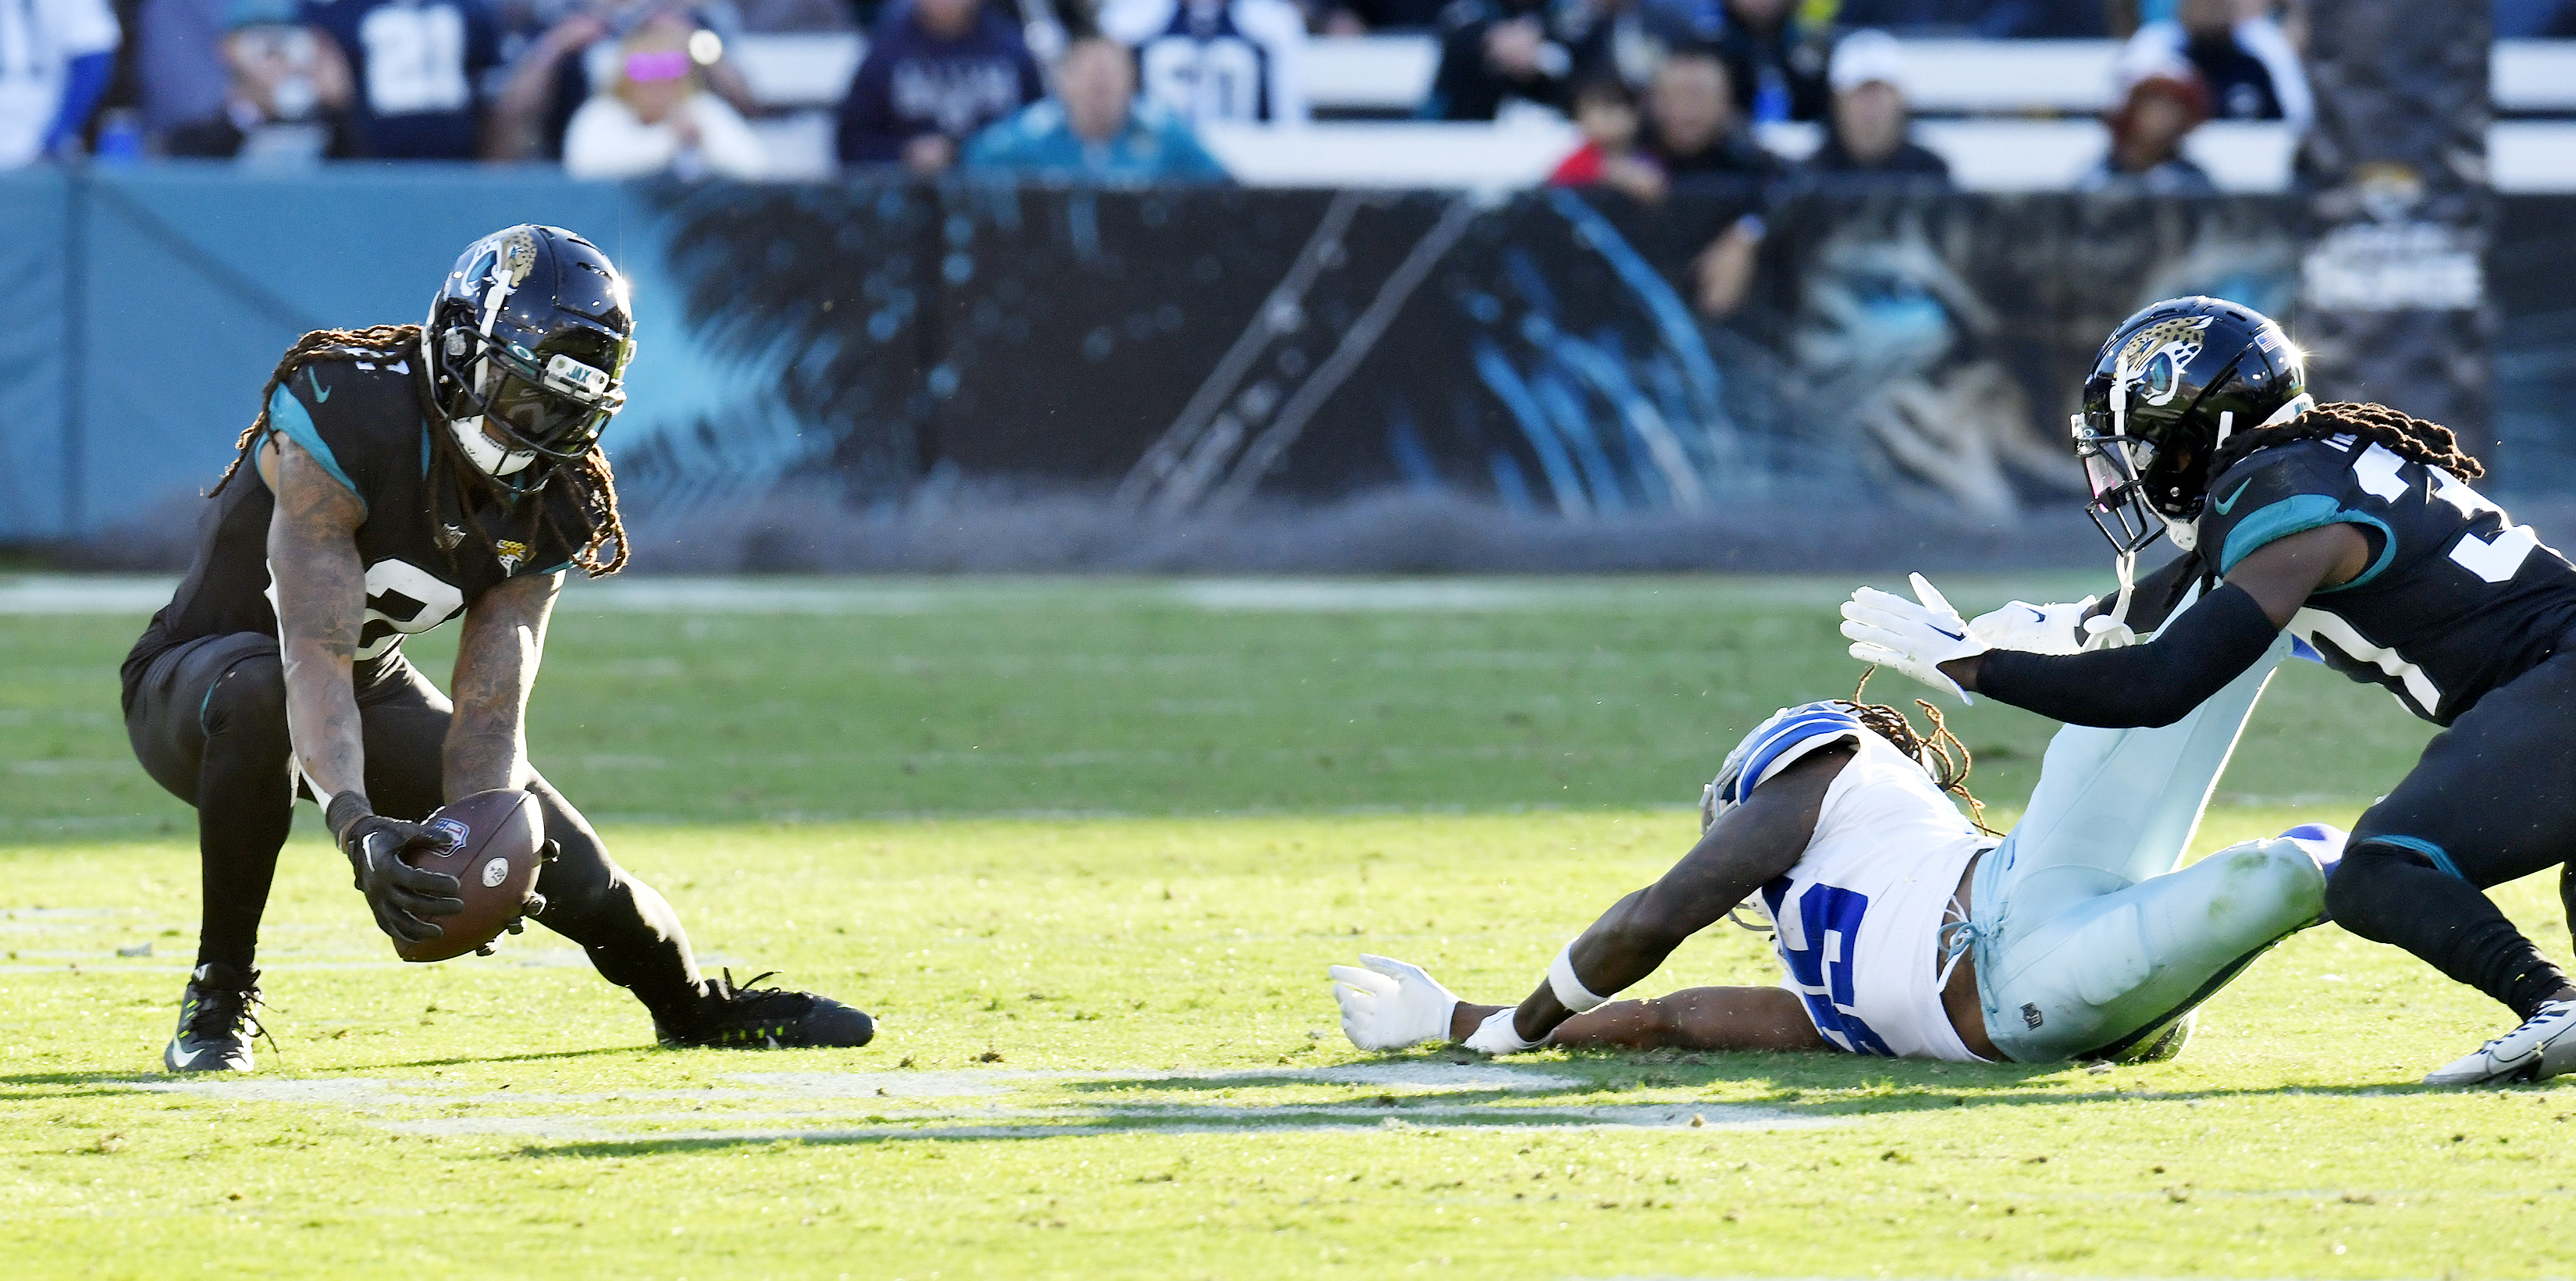 With win in hand, Cowboys fall apart and lose to Jaguars in OT, 40-34